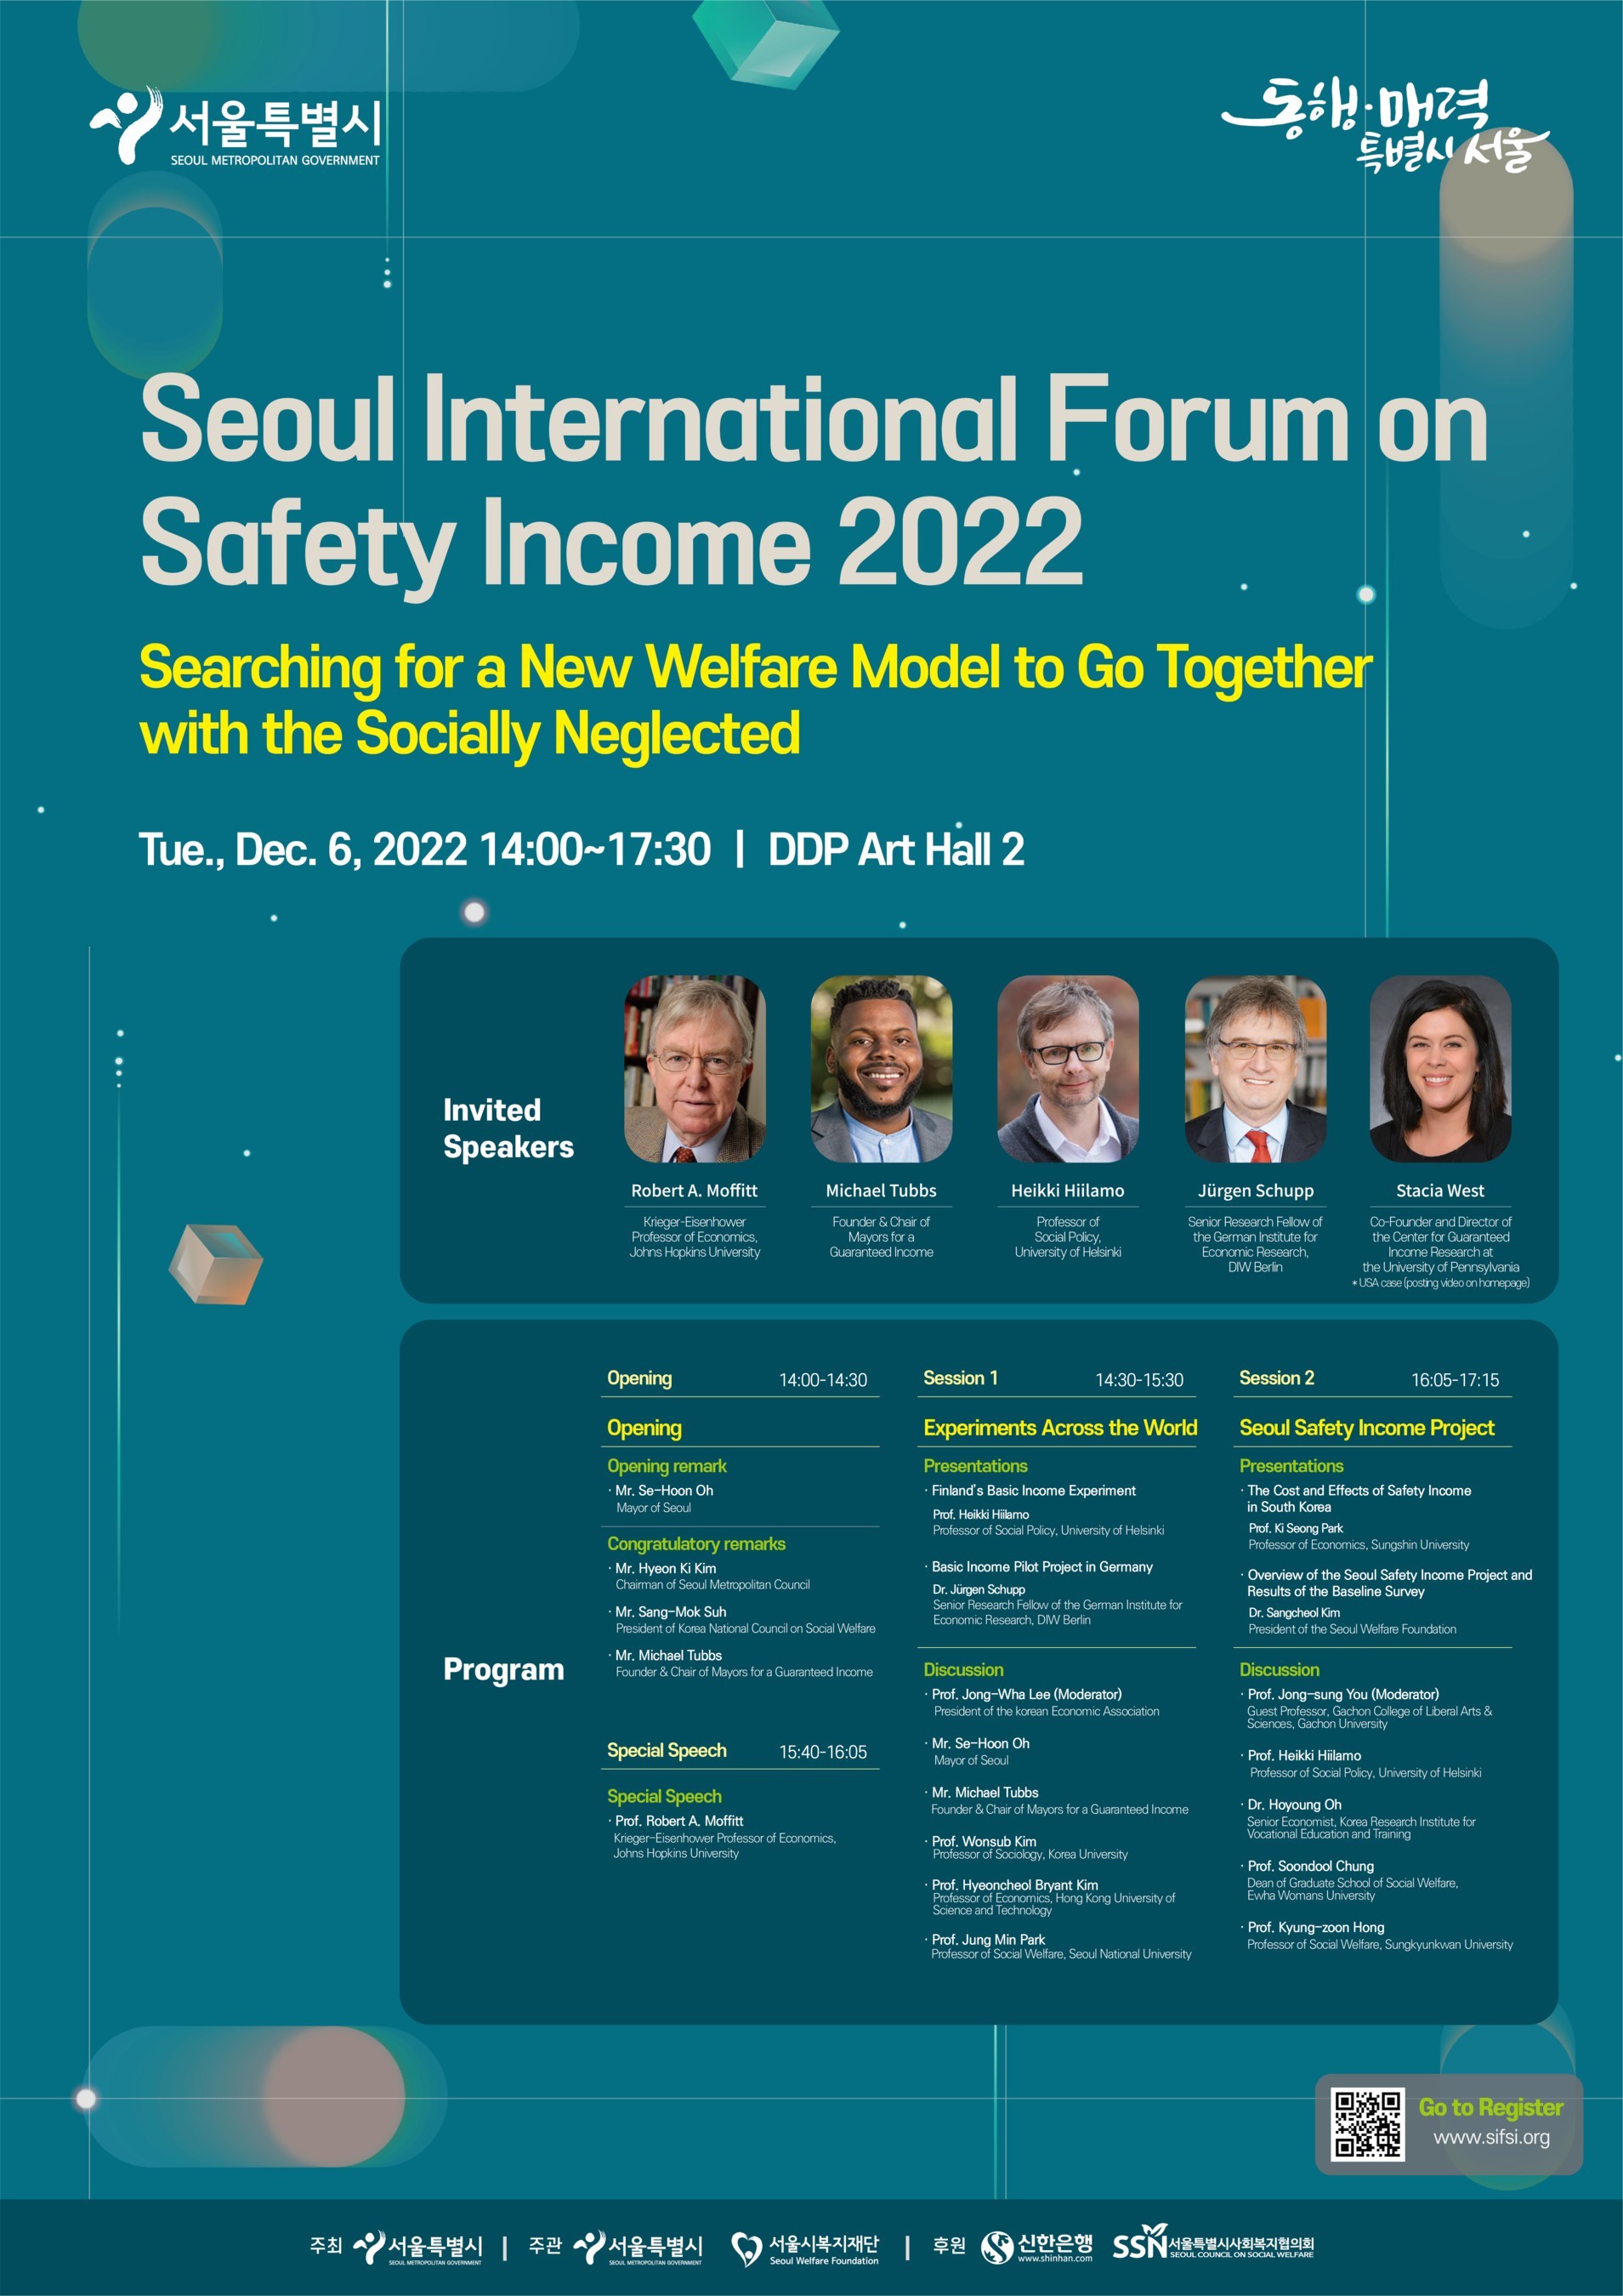 Seoul Metropolitan Government hosts the "International Forum on Safety Income" in December to solve poverty and inequality